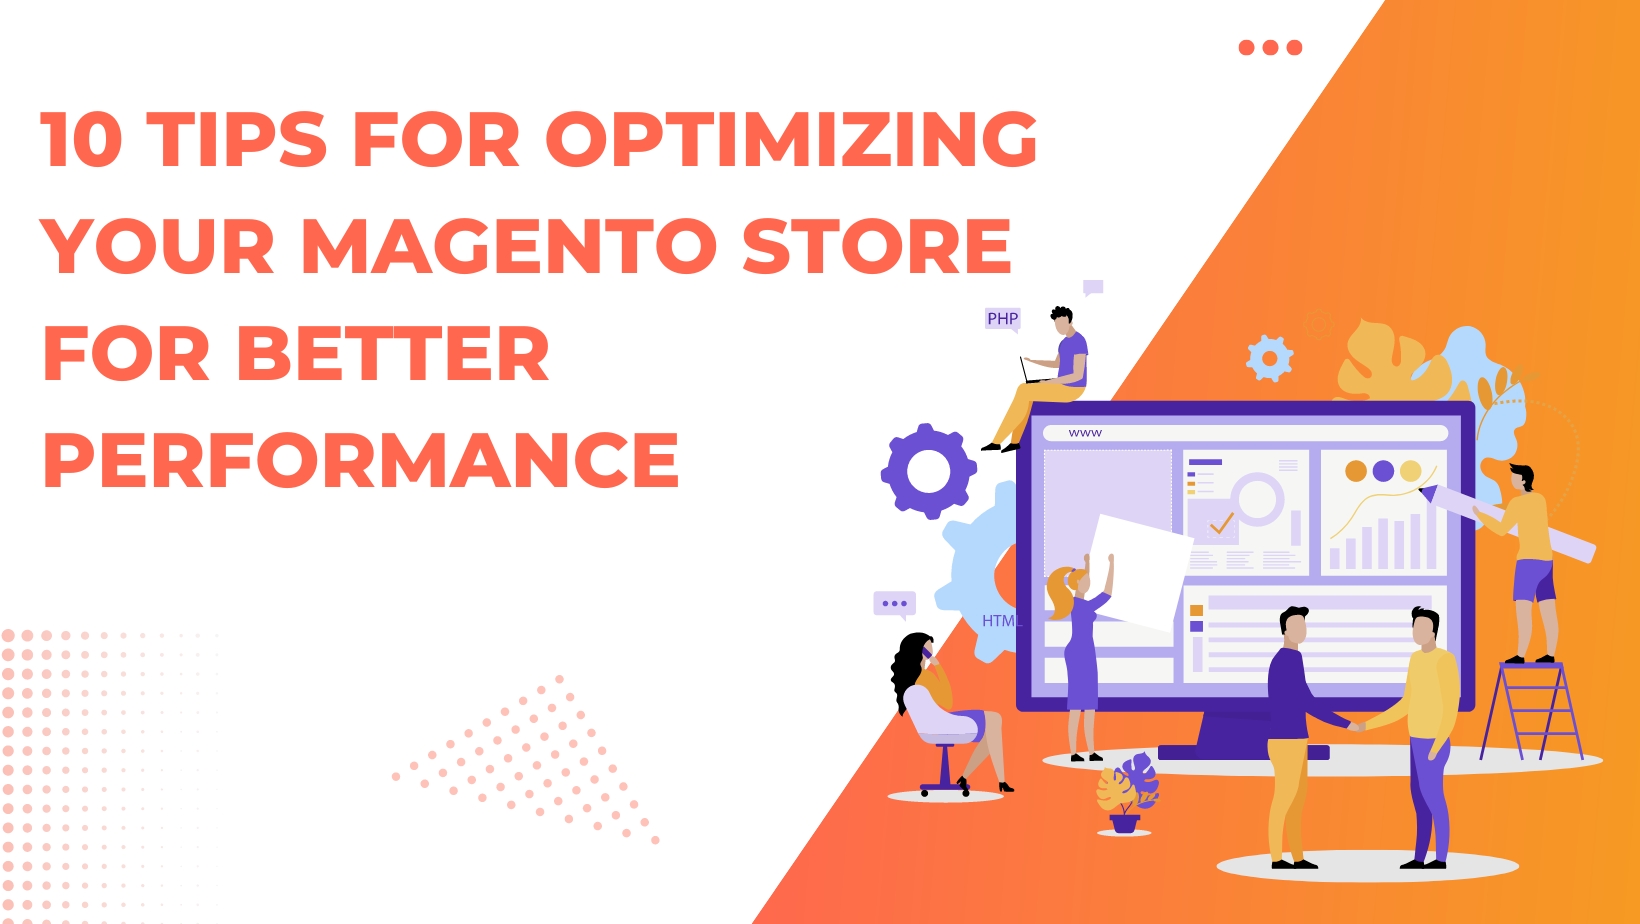 10 Tips for Optimizing your Magento Store for better performance